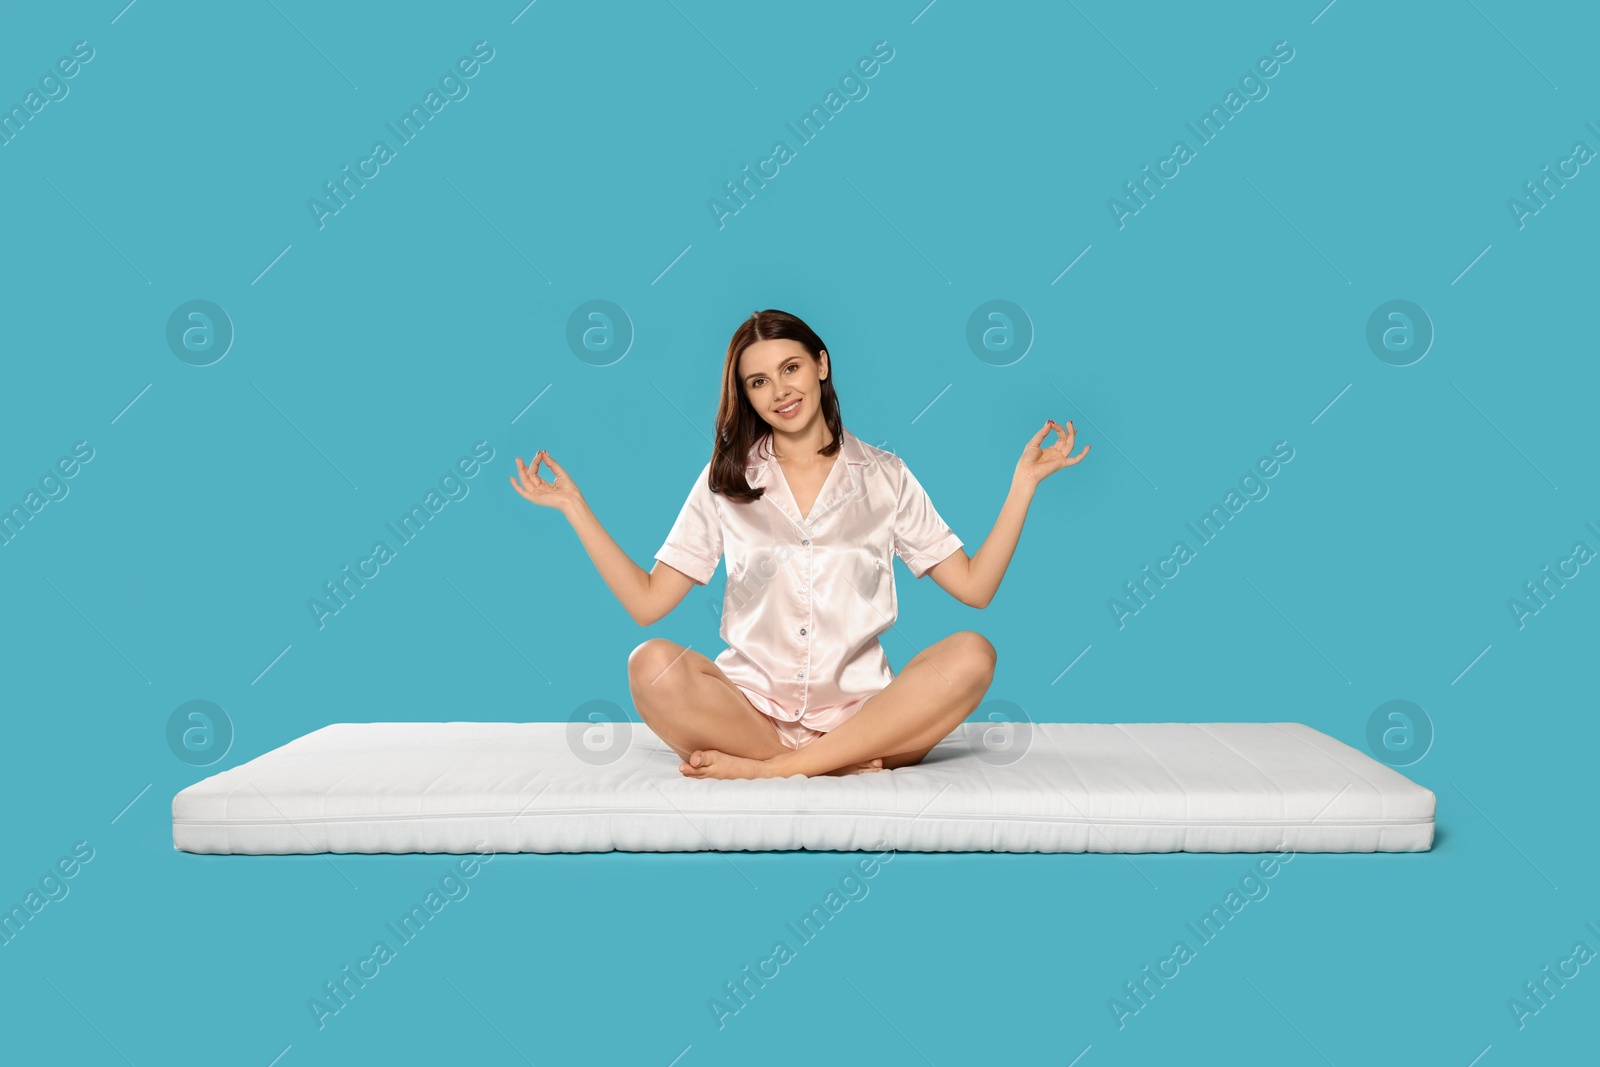 Photo of Young woman meditating on soft mattress against light blue background